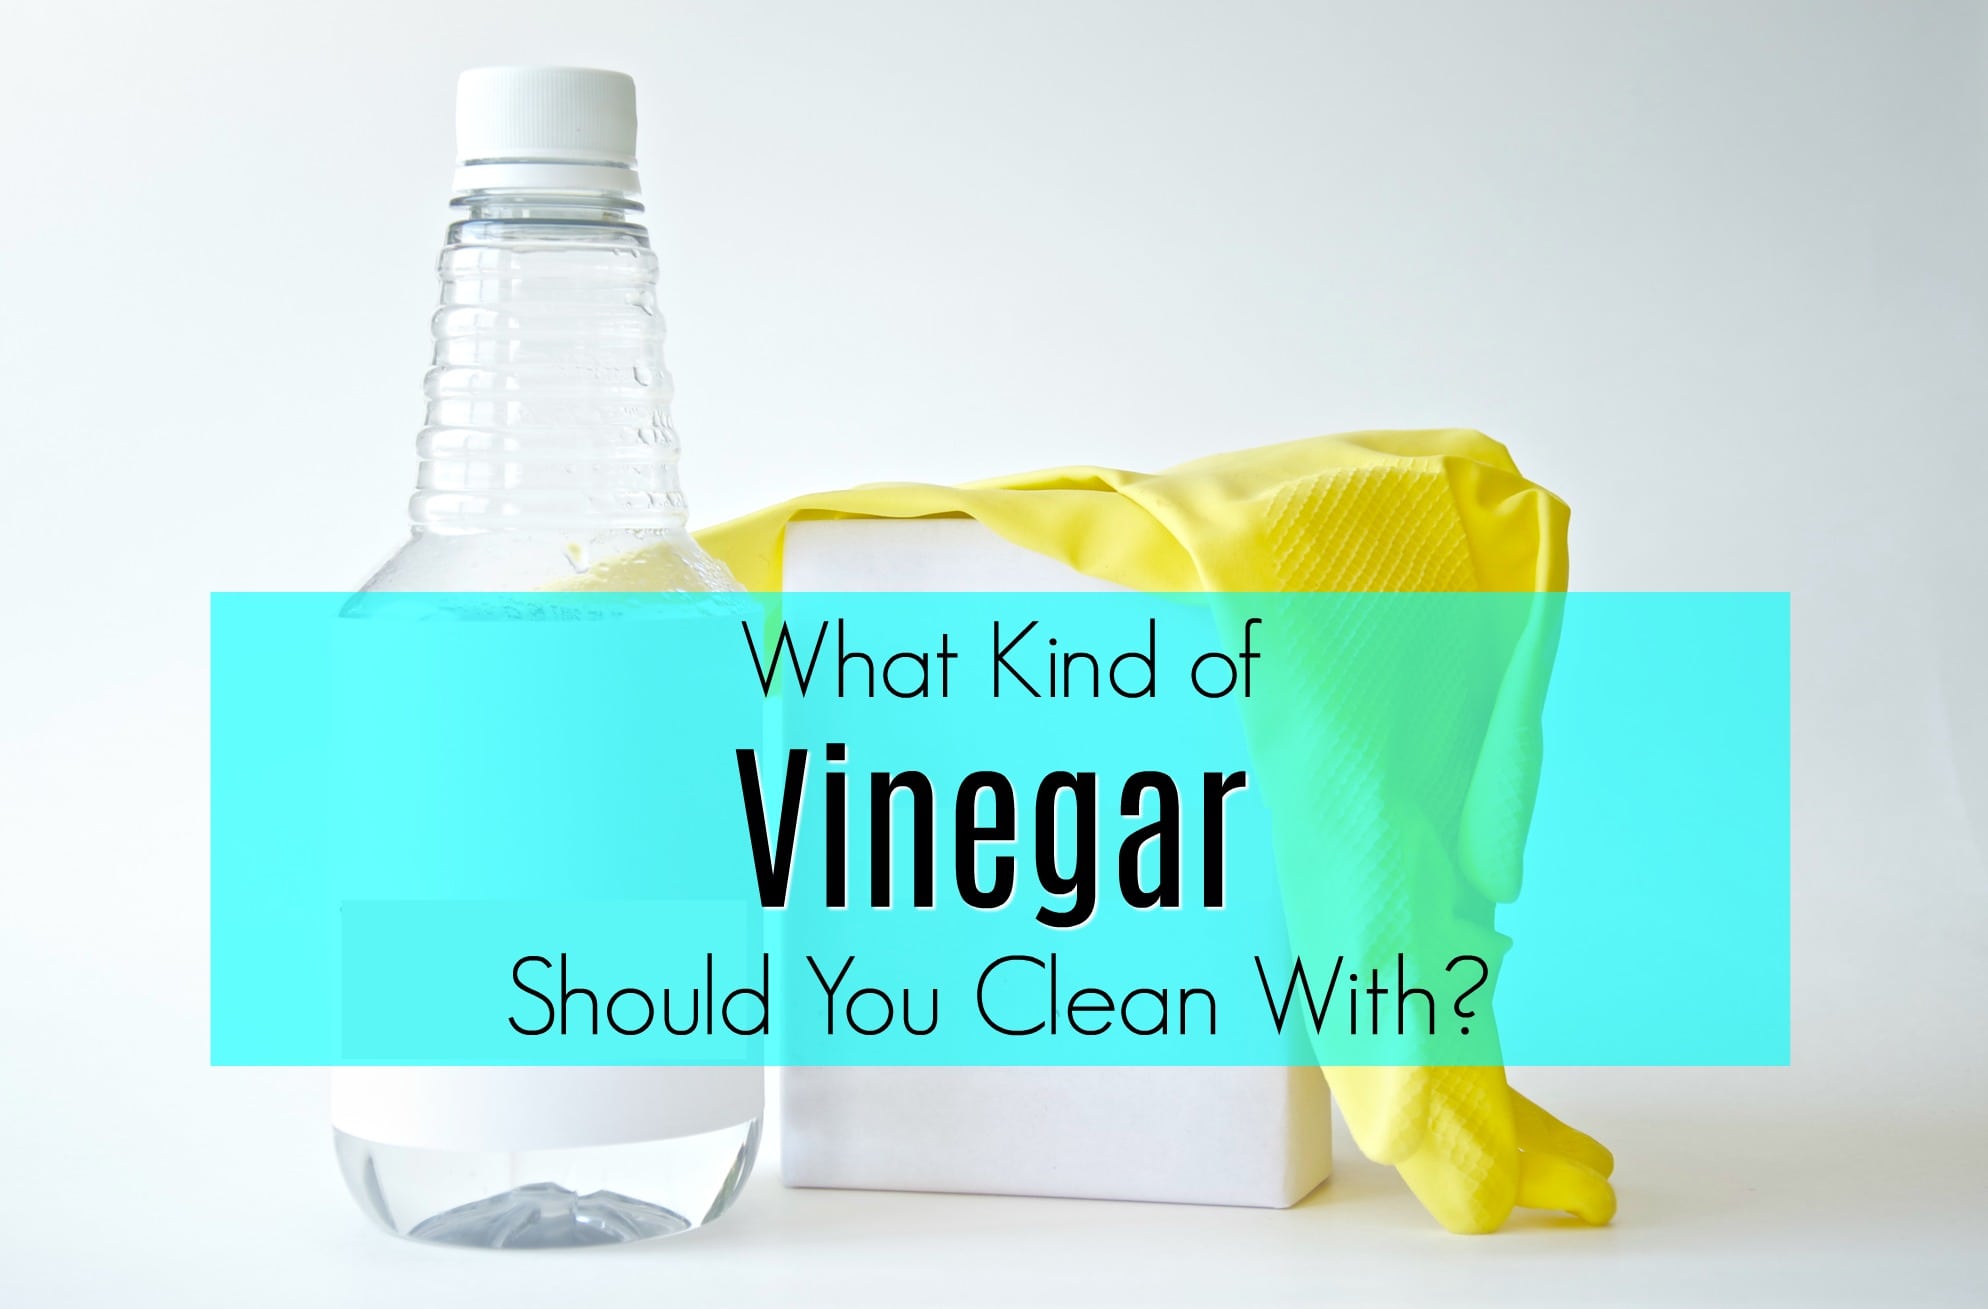 https://www.getgreenbewell.com/wp-content/uploads/2018/01/What-Kind-of-Vinegar-Should-You-Clean-With.jpg